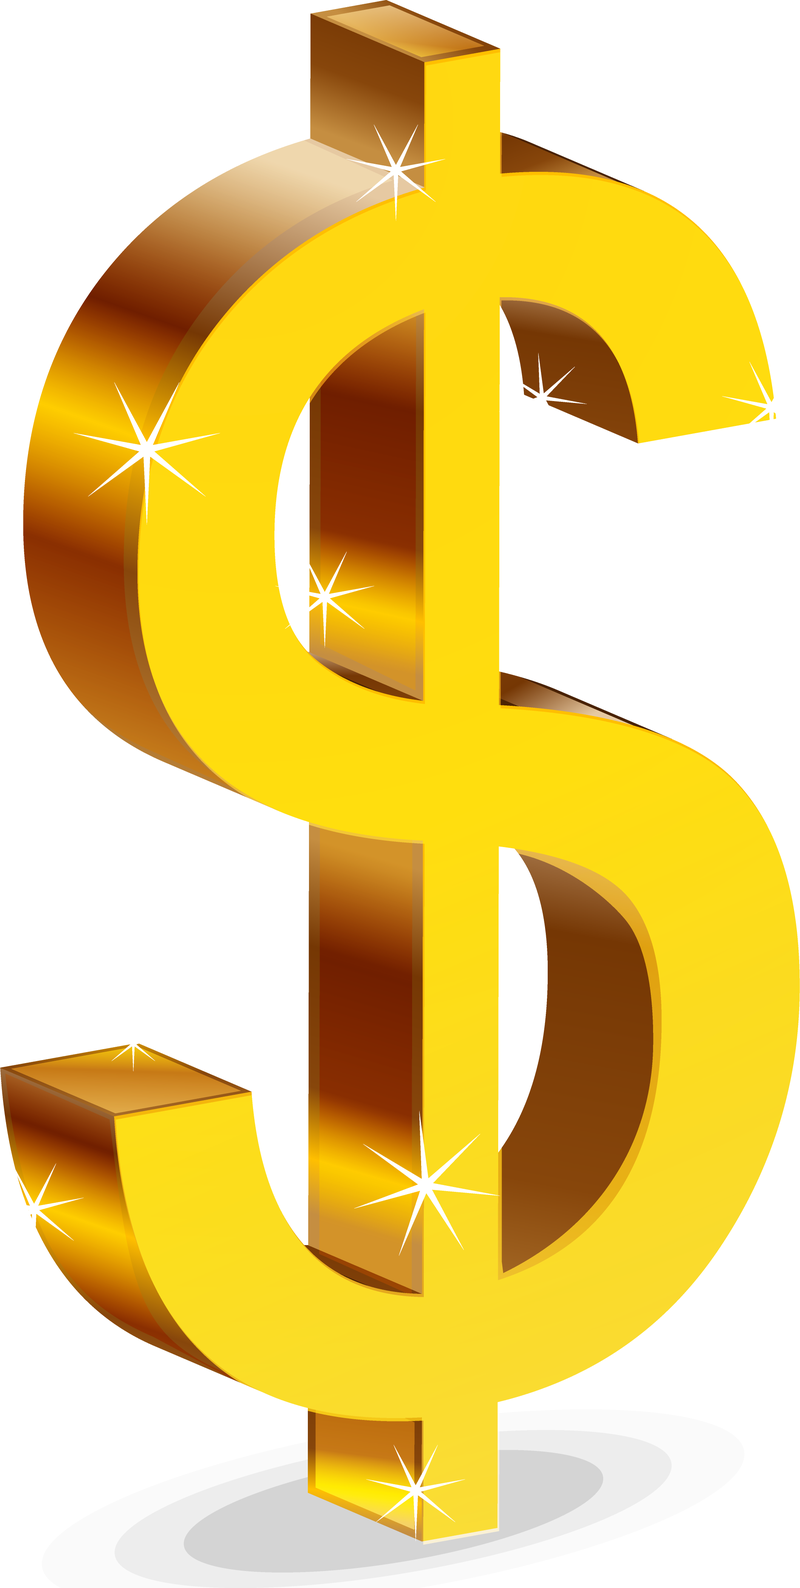 Glossy Dollar Sign Isolated - Vector download